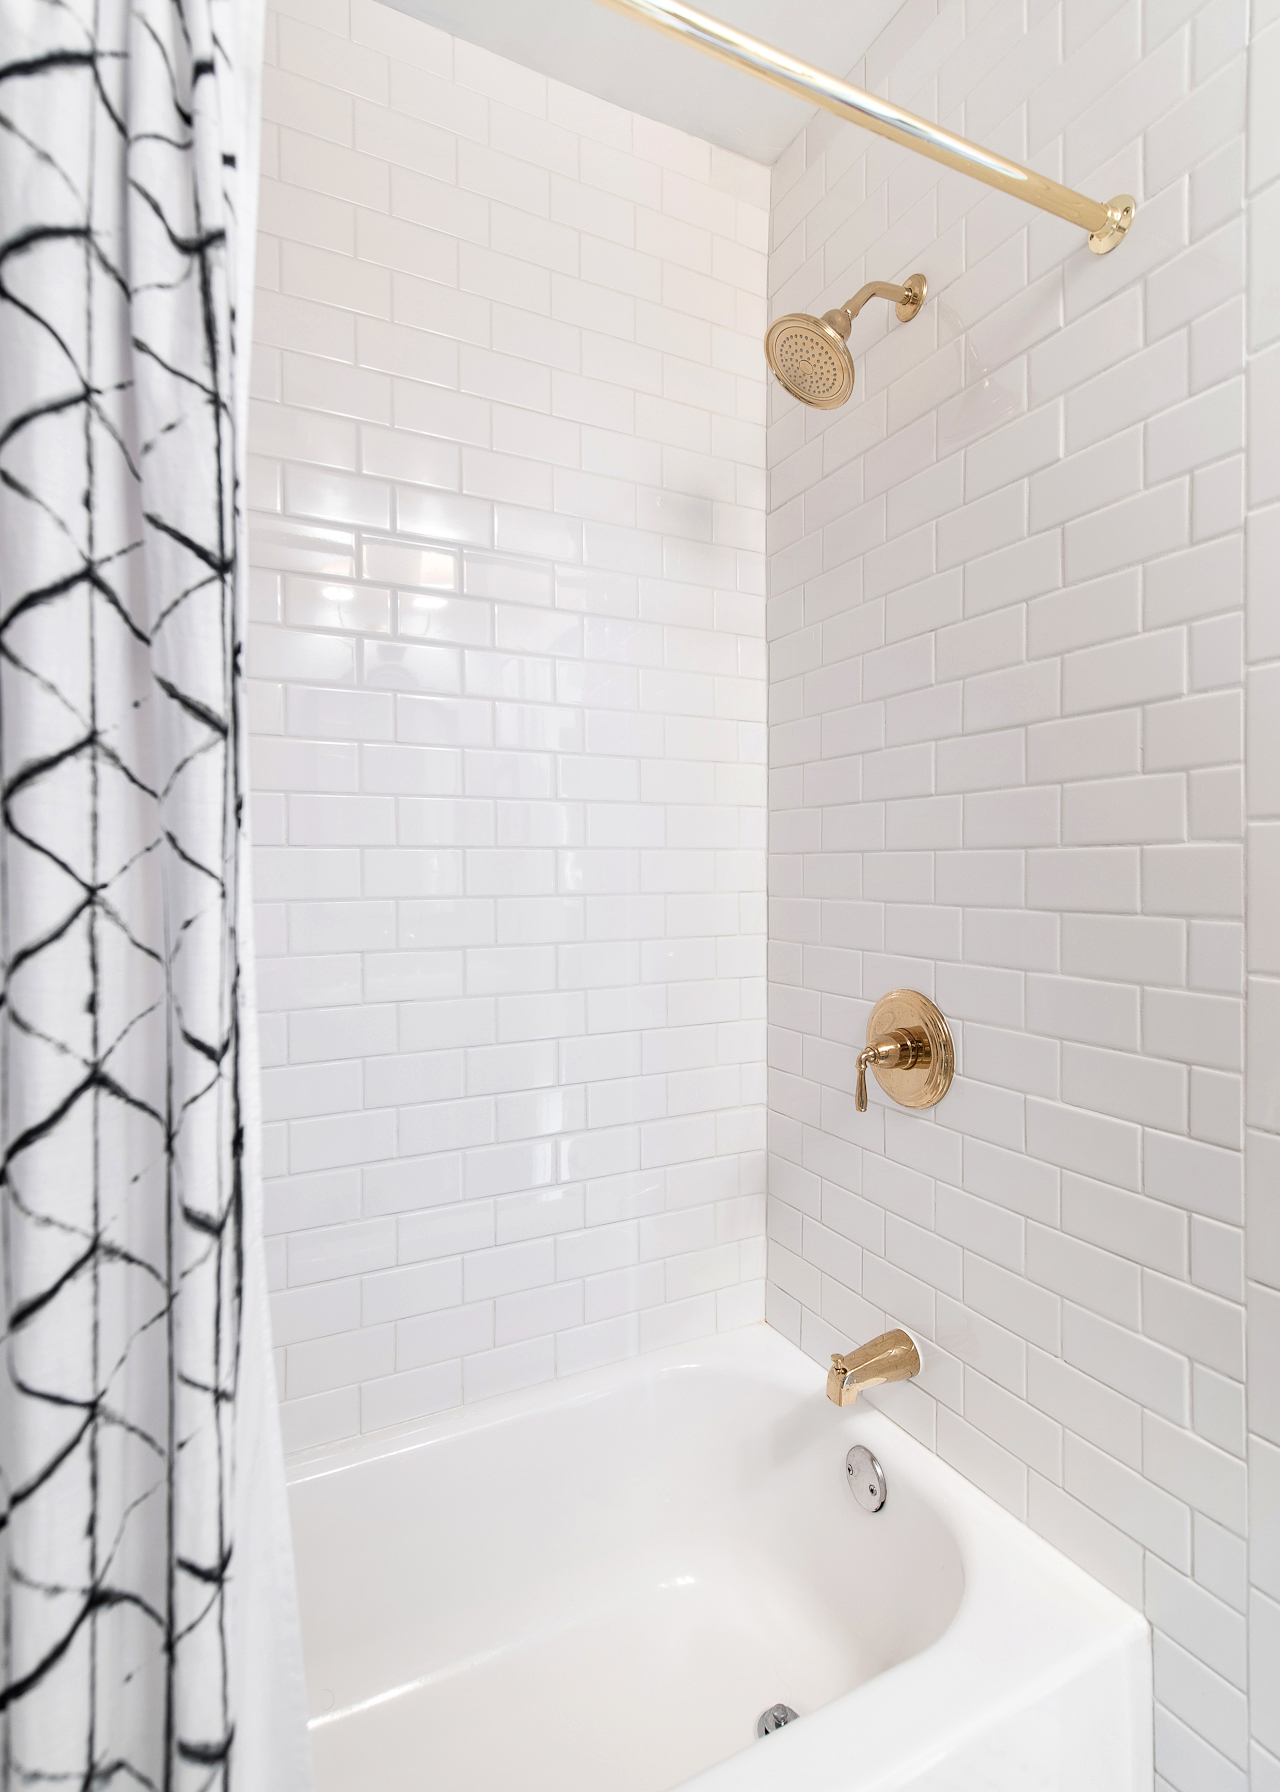 1920s-Inspired Classic Small Bathroom